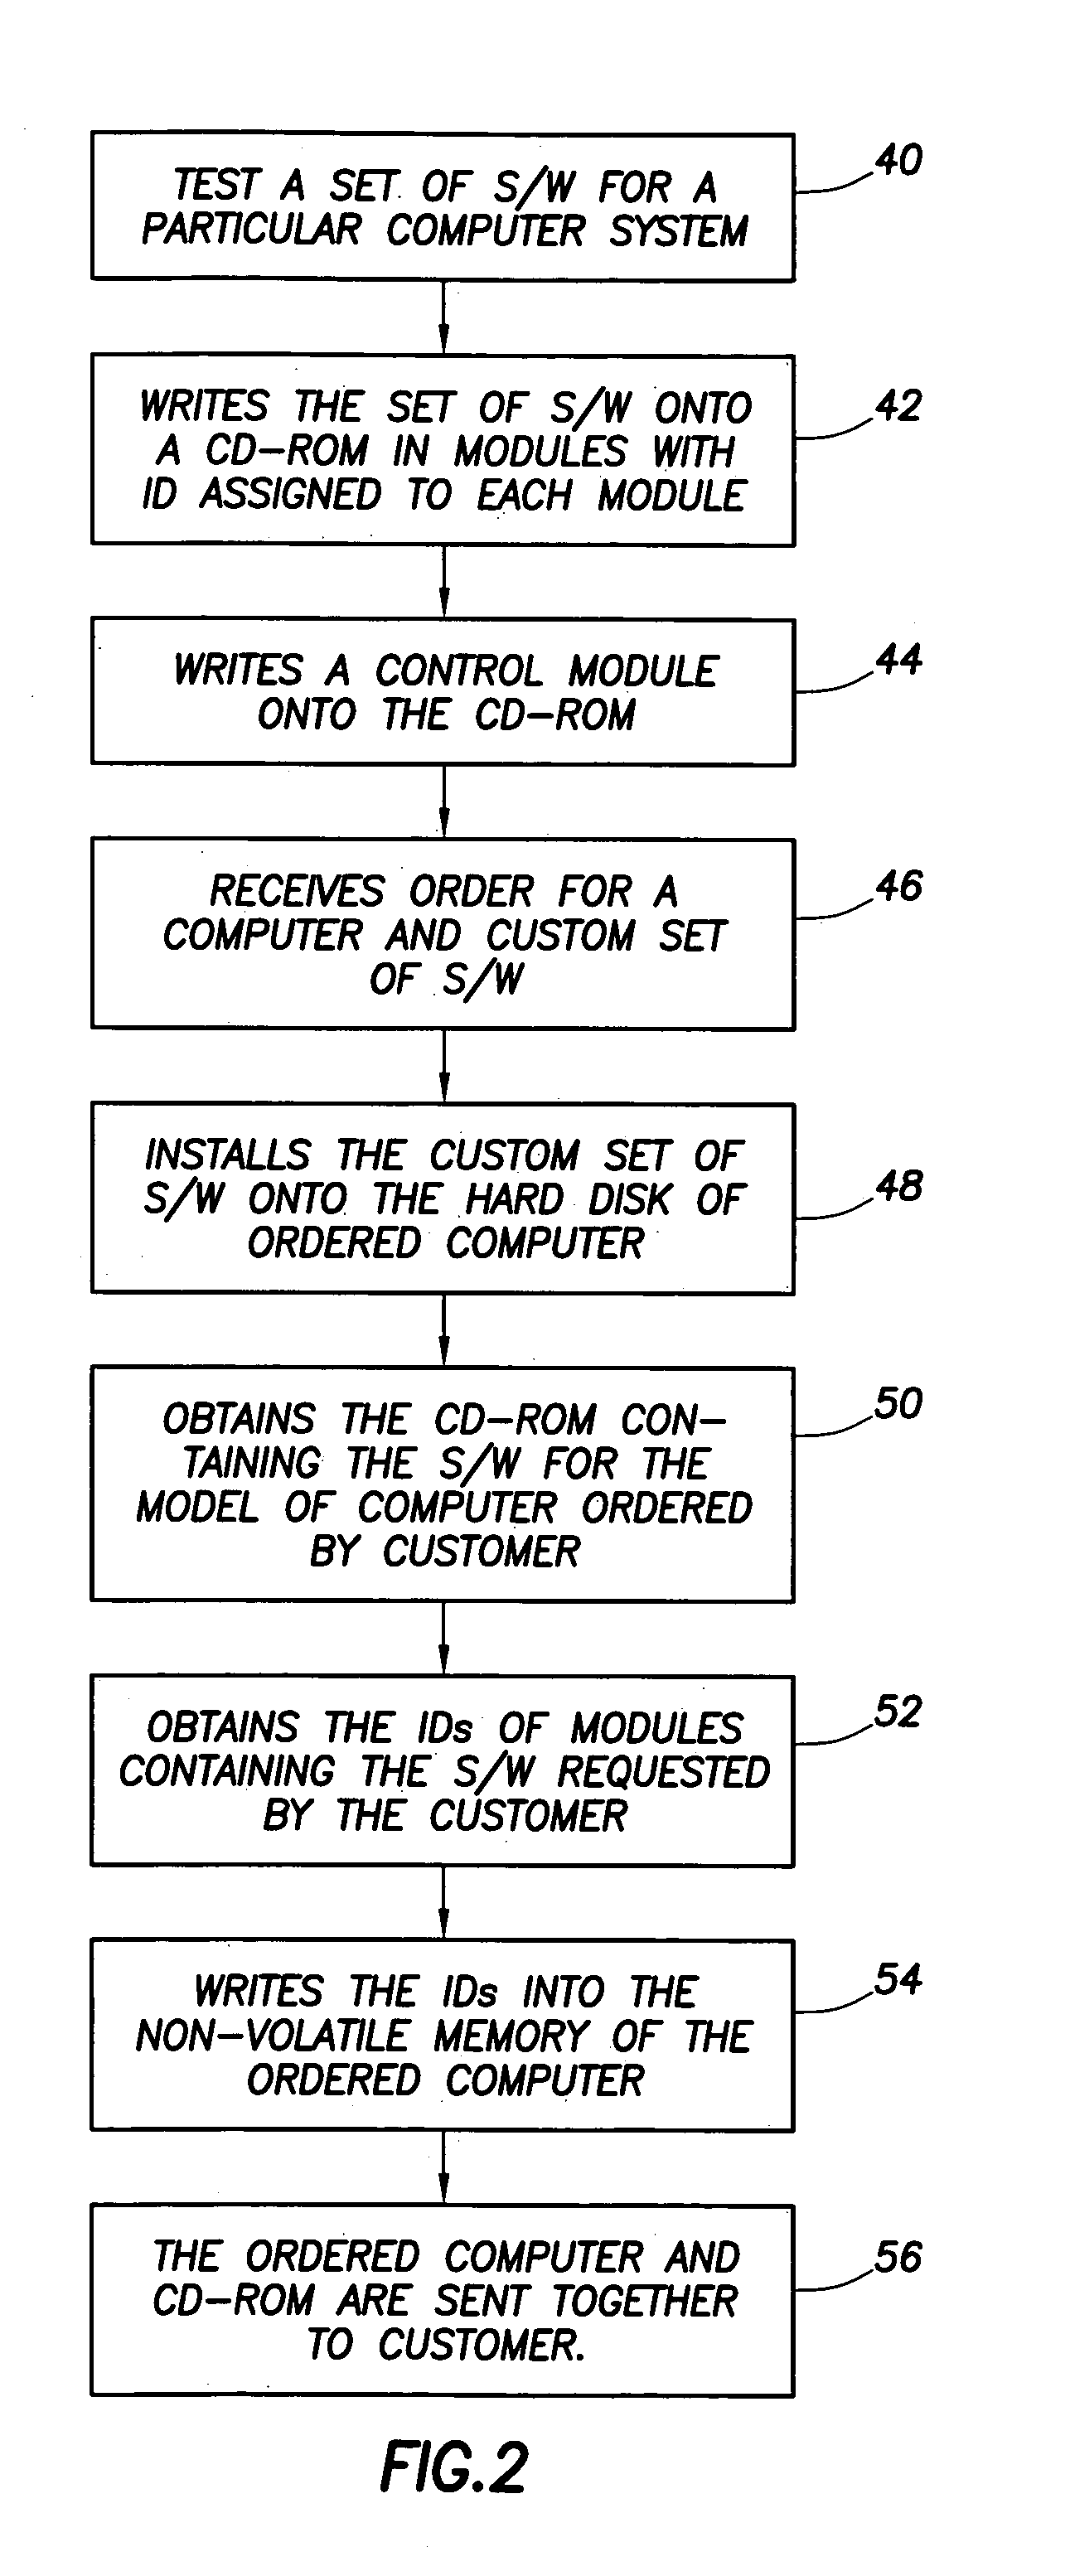 Software delivery system